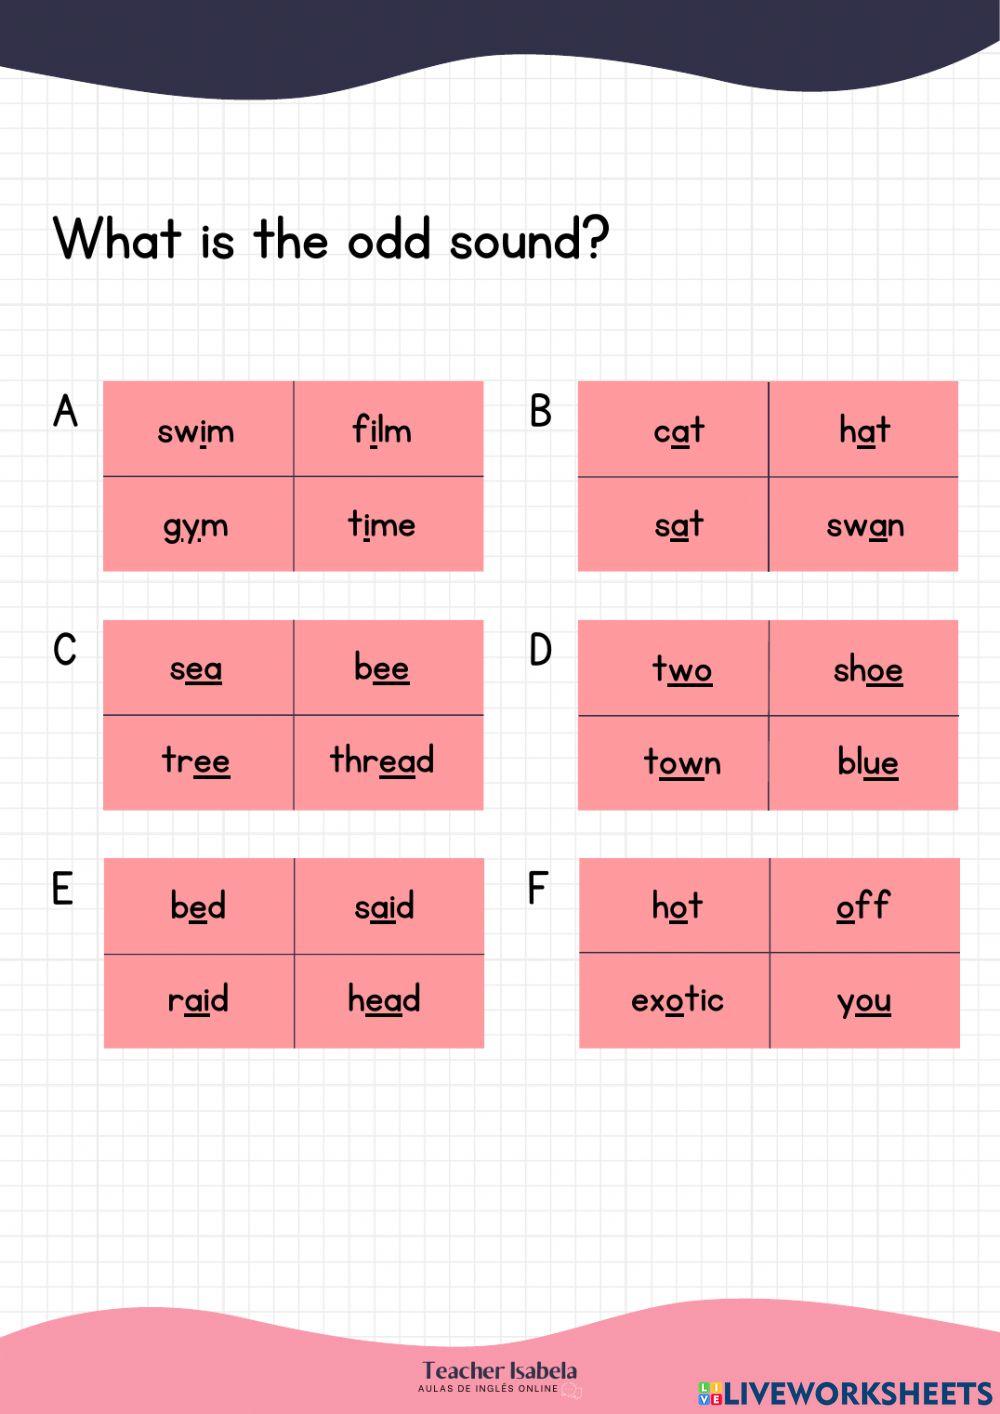 What is the odd sound?